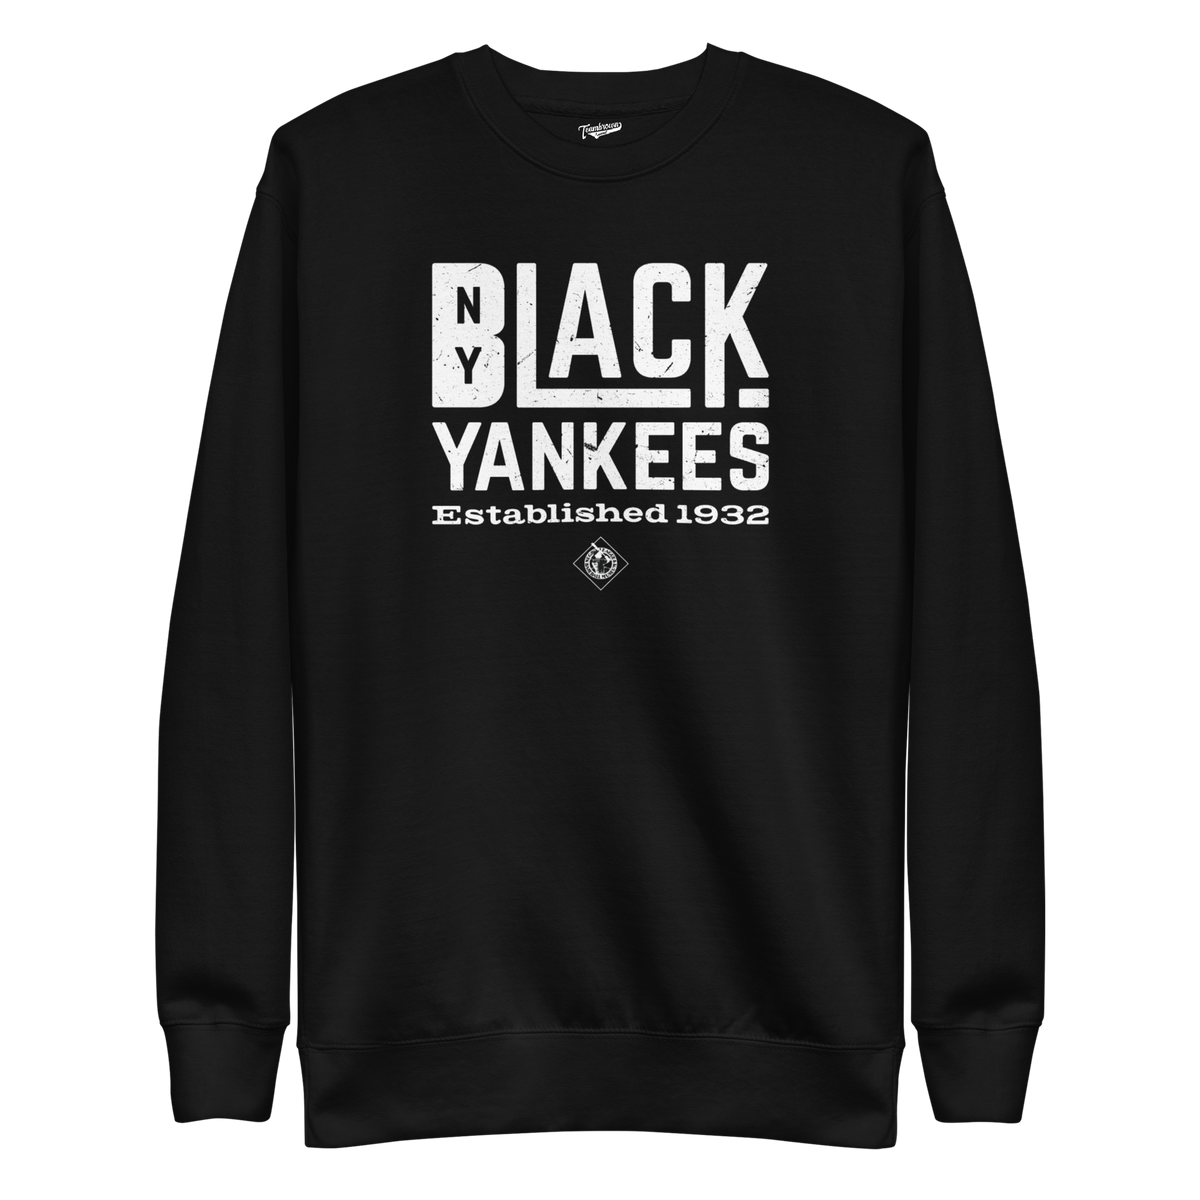 New York Black Yankees Legend T Shirt  African Imports USA.com - African  American Products and Gifts Store